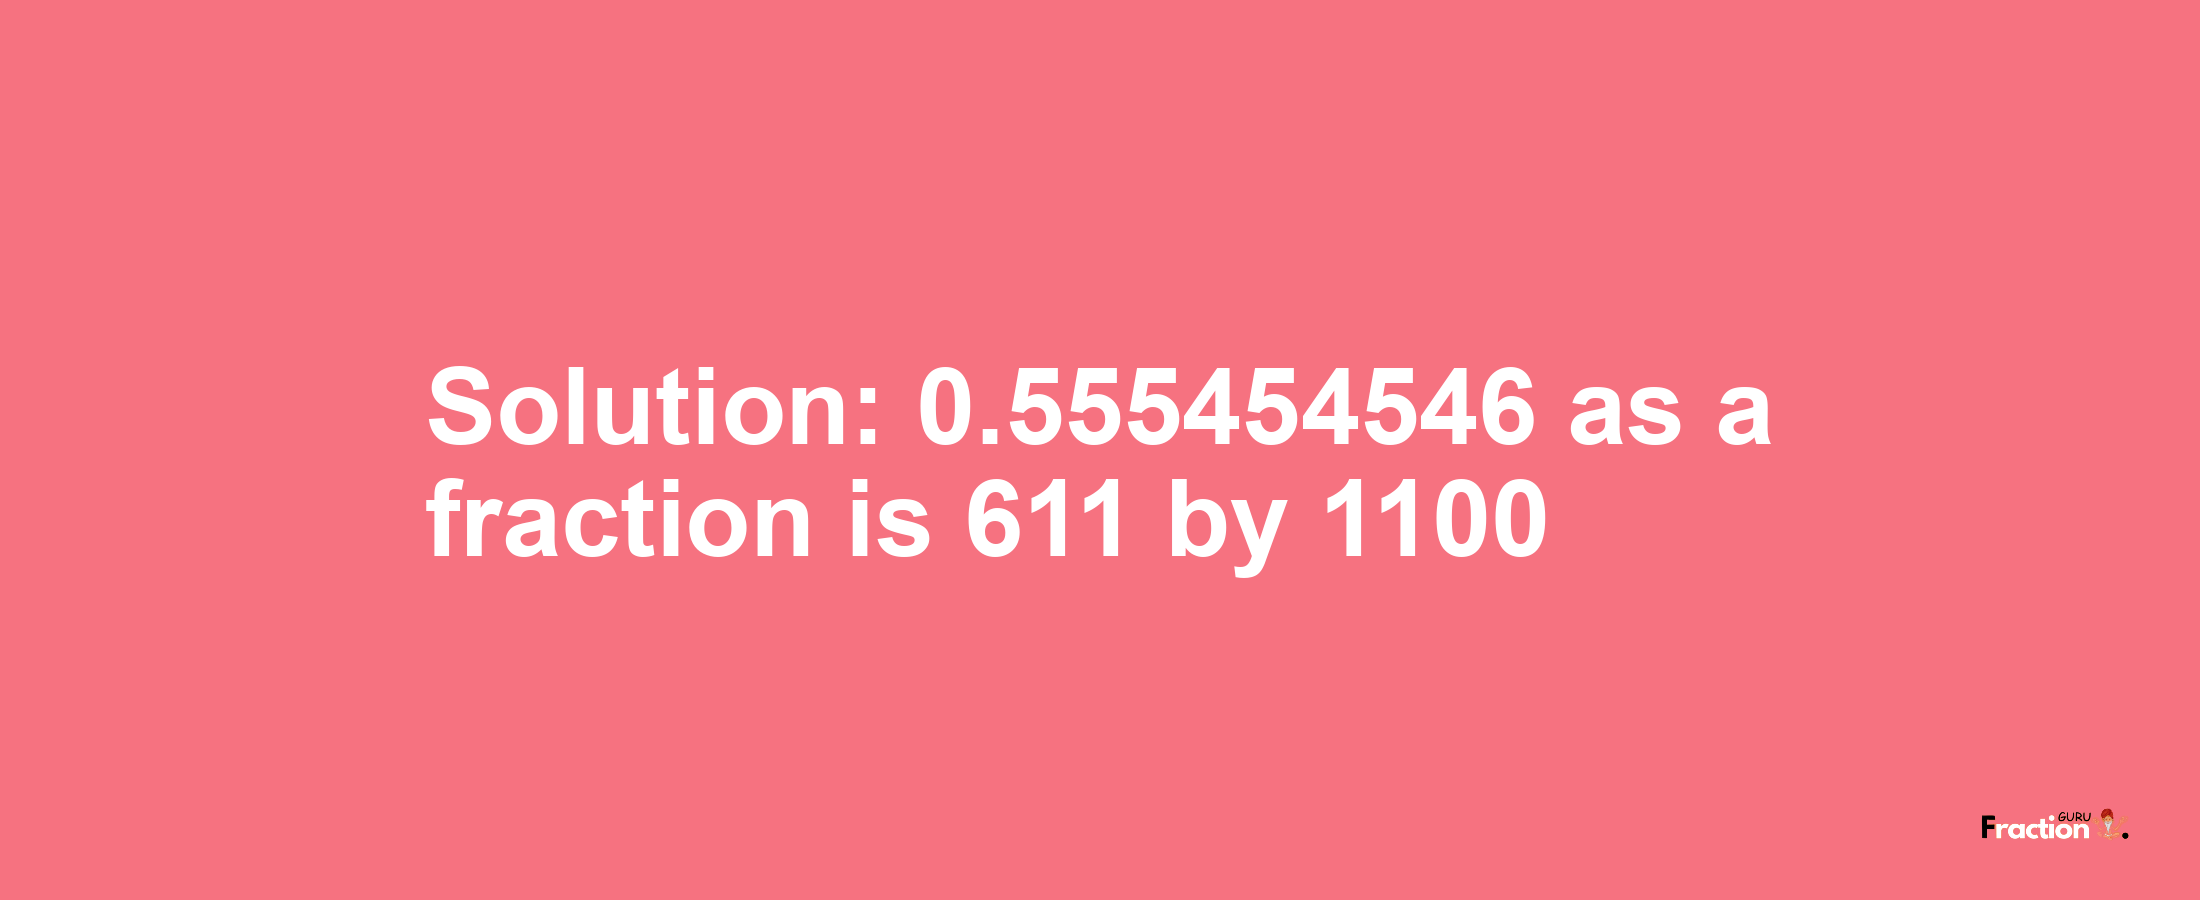 Solution:0.555454546 as a fraction is 611/1100